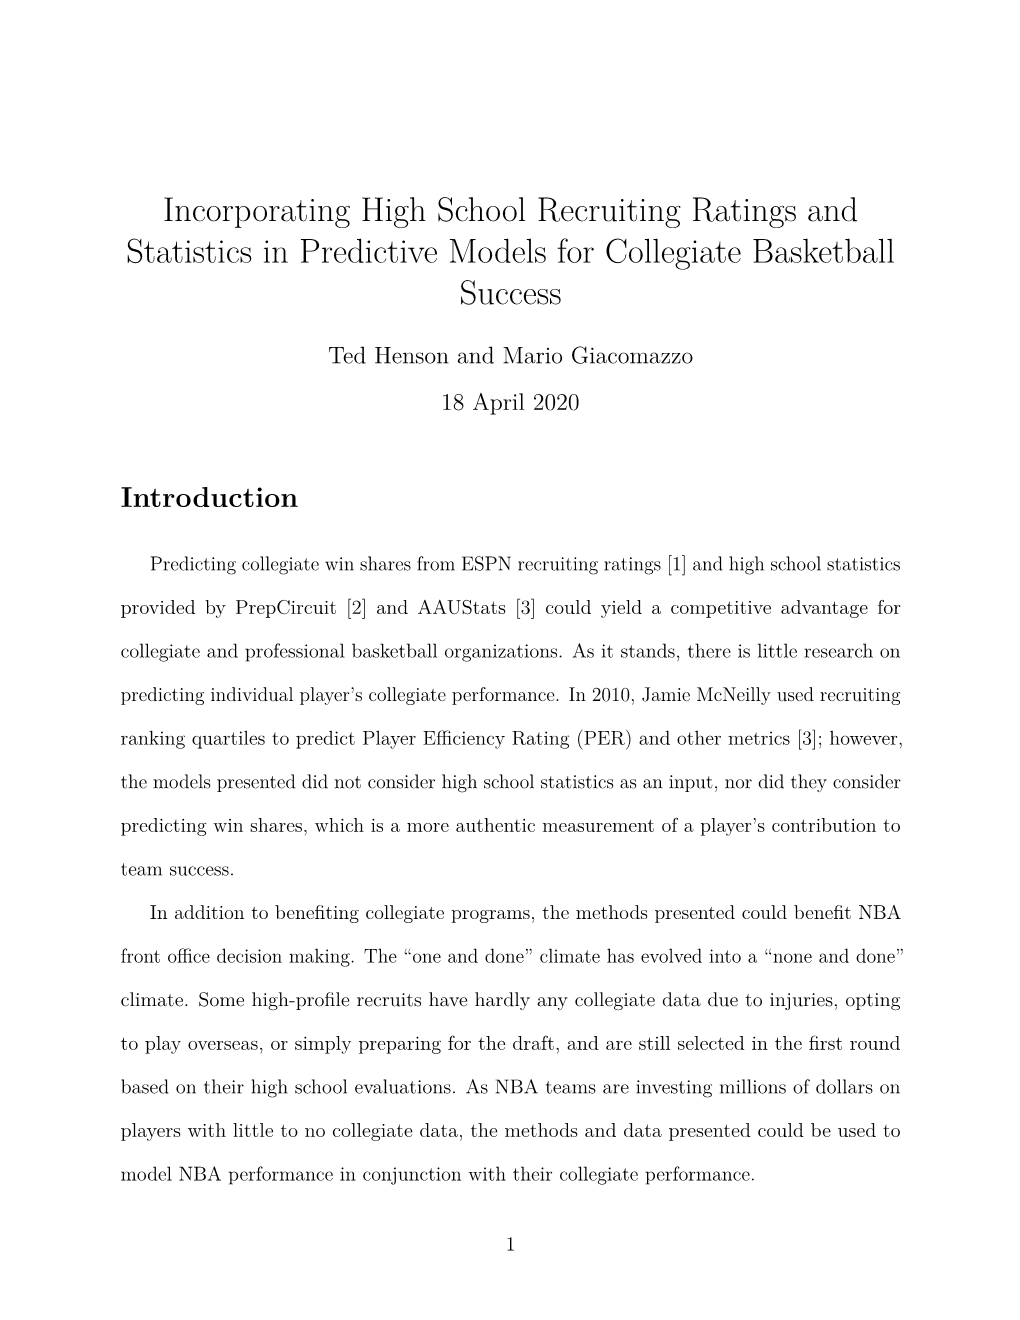 Incorporating High School Recruiting Ratings and Statistics in Predictive Models for Collegiate Basketball Success